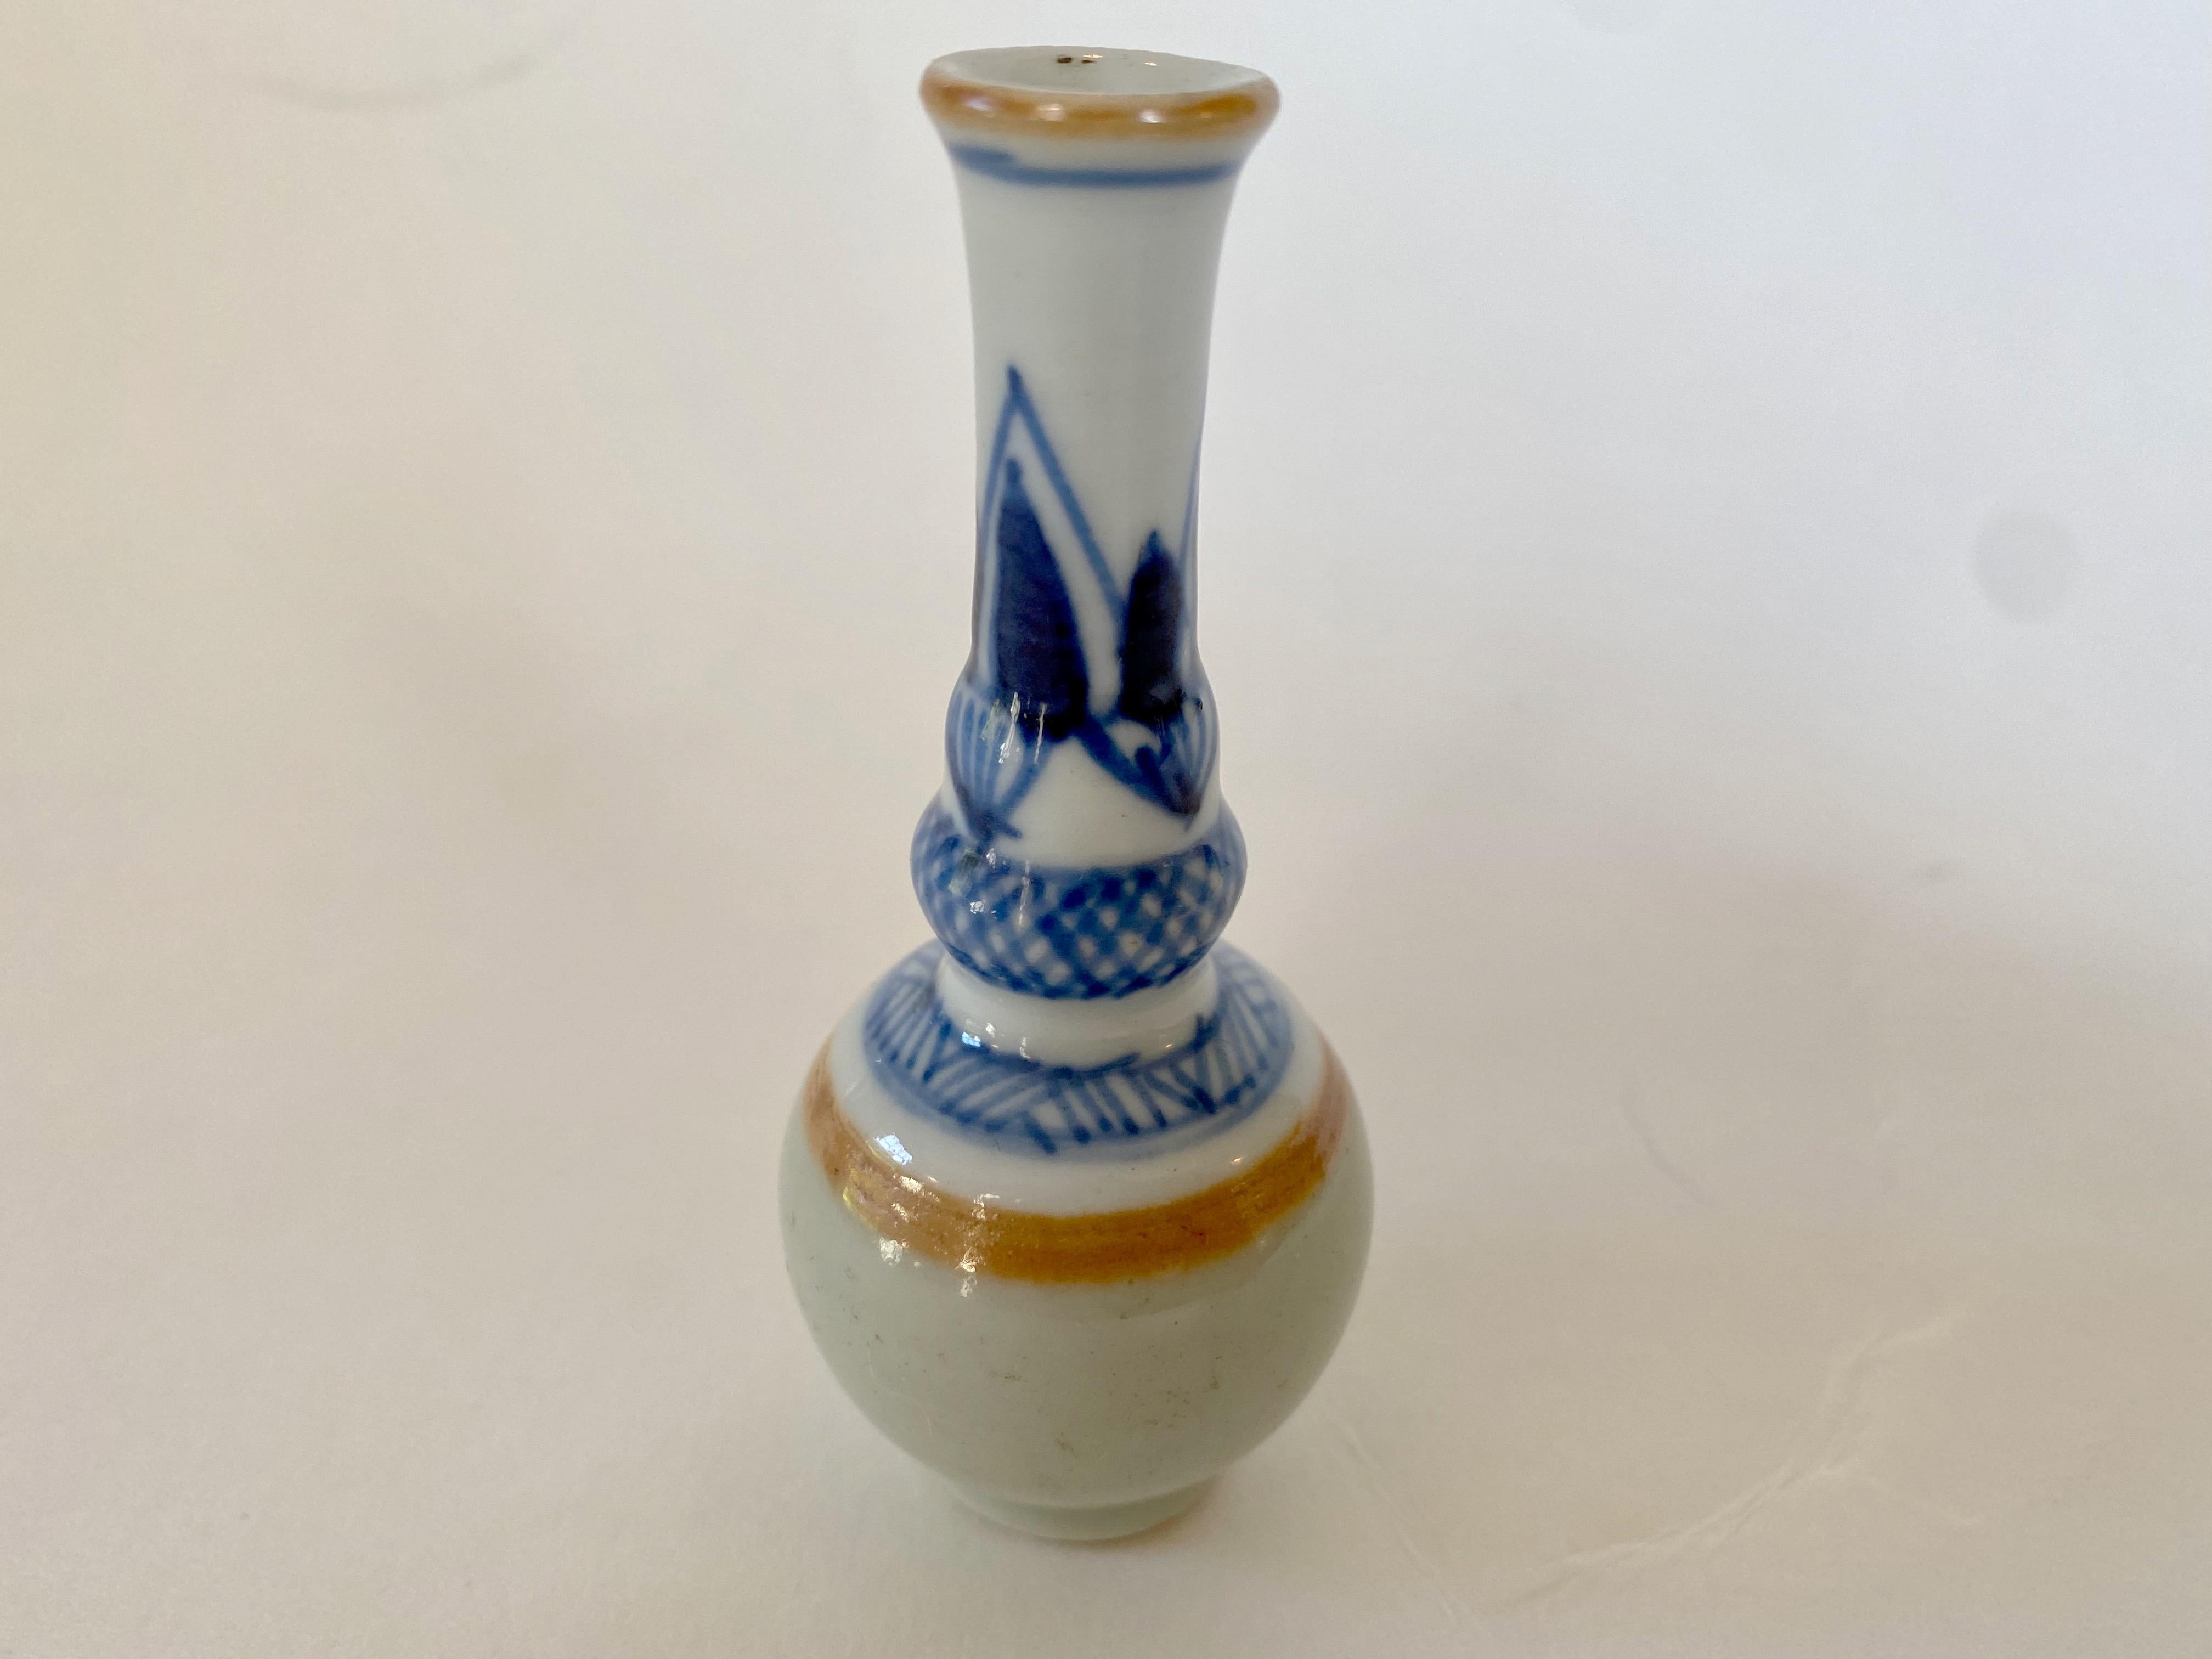 18th Century miniature blue and white vase with celadon base and cafe au lait band, Qianlong period (1736 - 1795). Small and elegant, with an unusual color pattern.
 